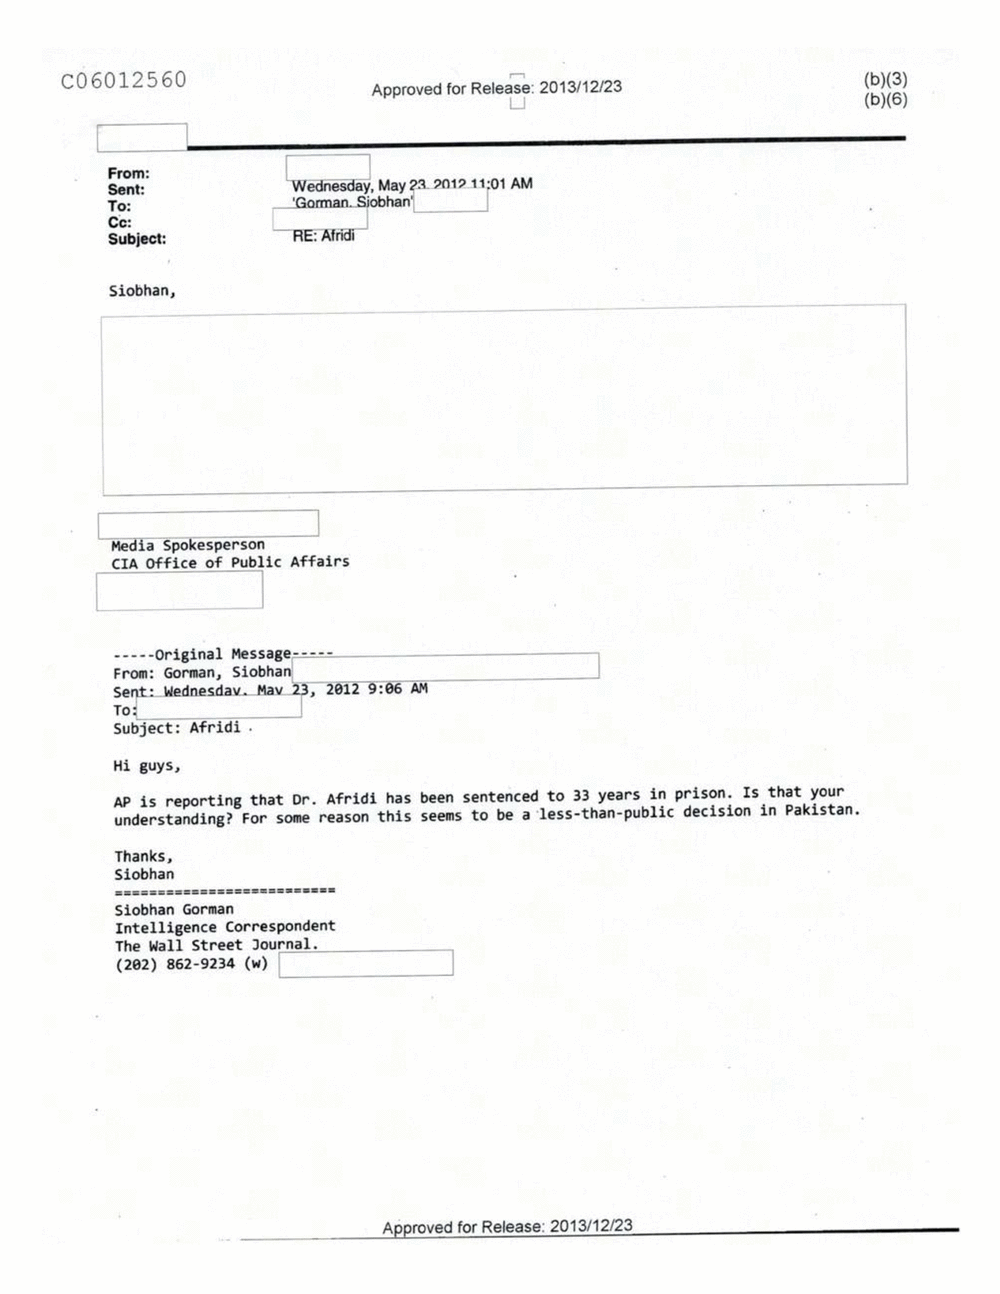 Page 164 from Email Correspondence Between Reporters and CIA Flacks